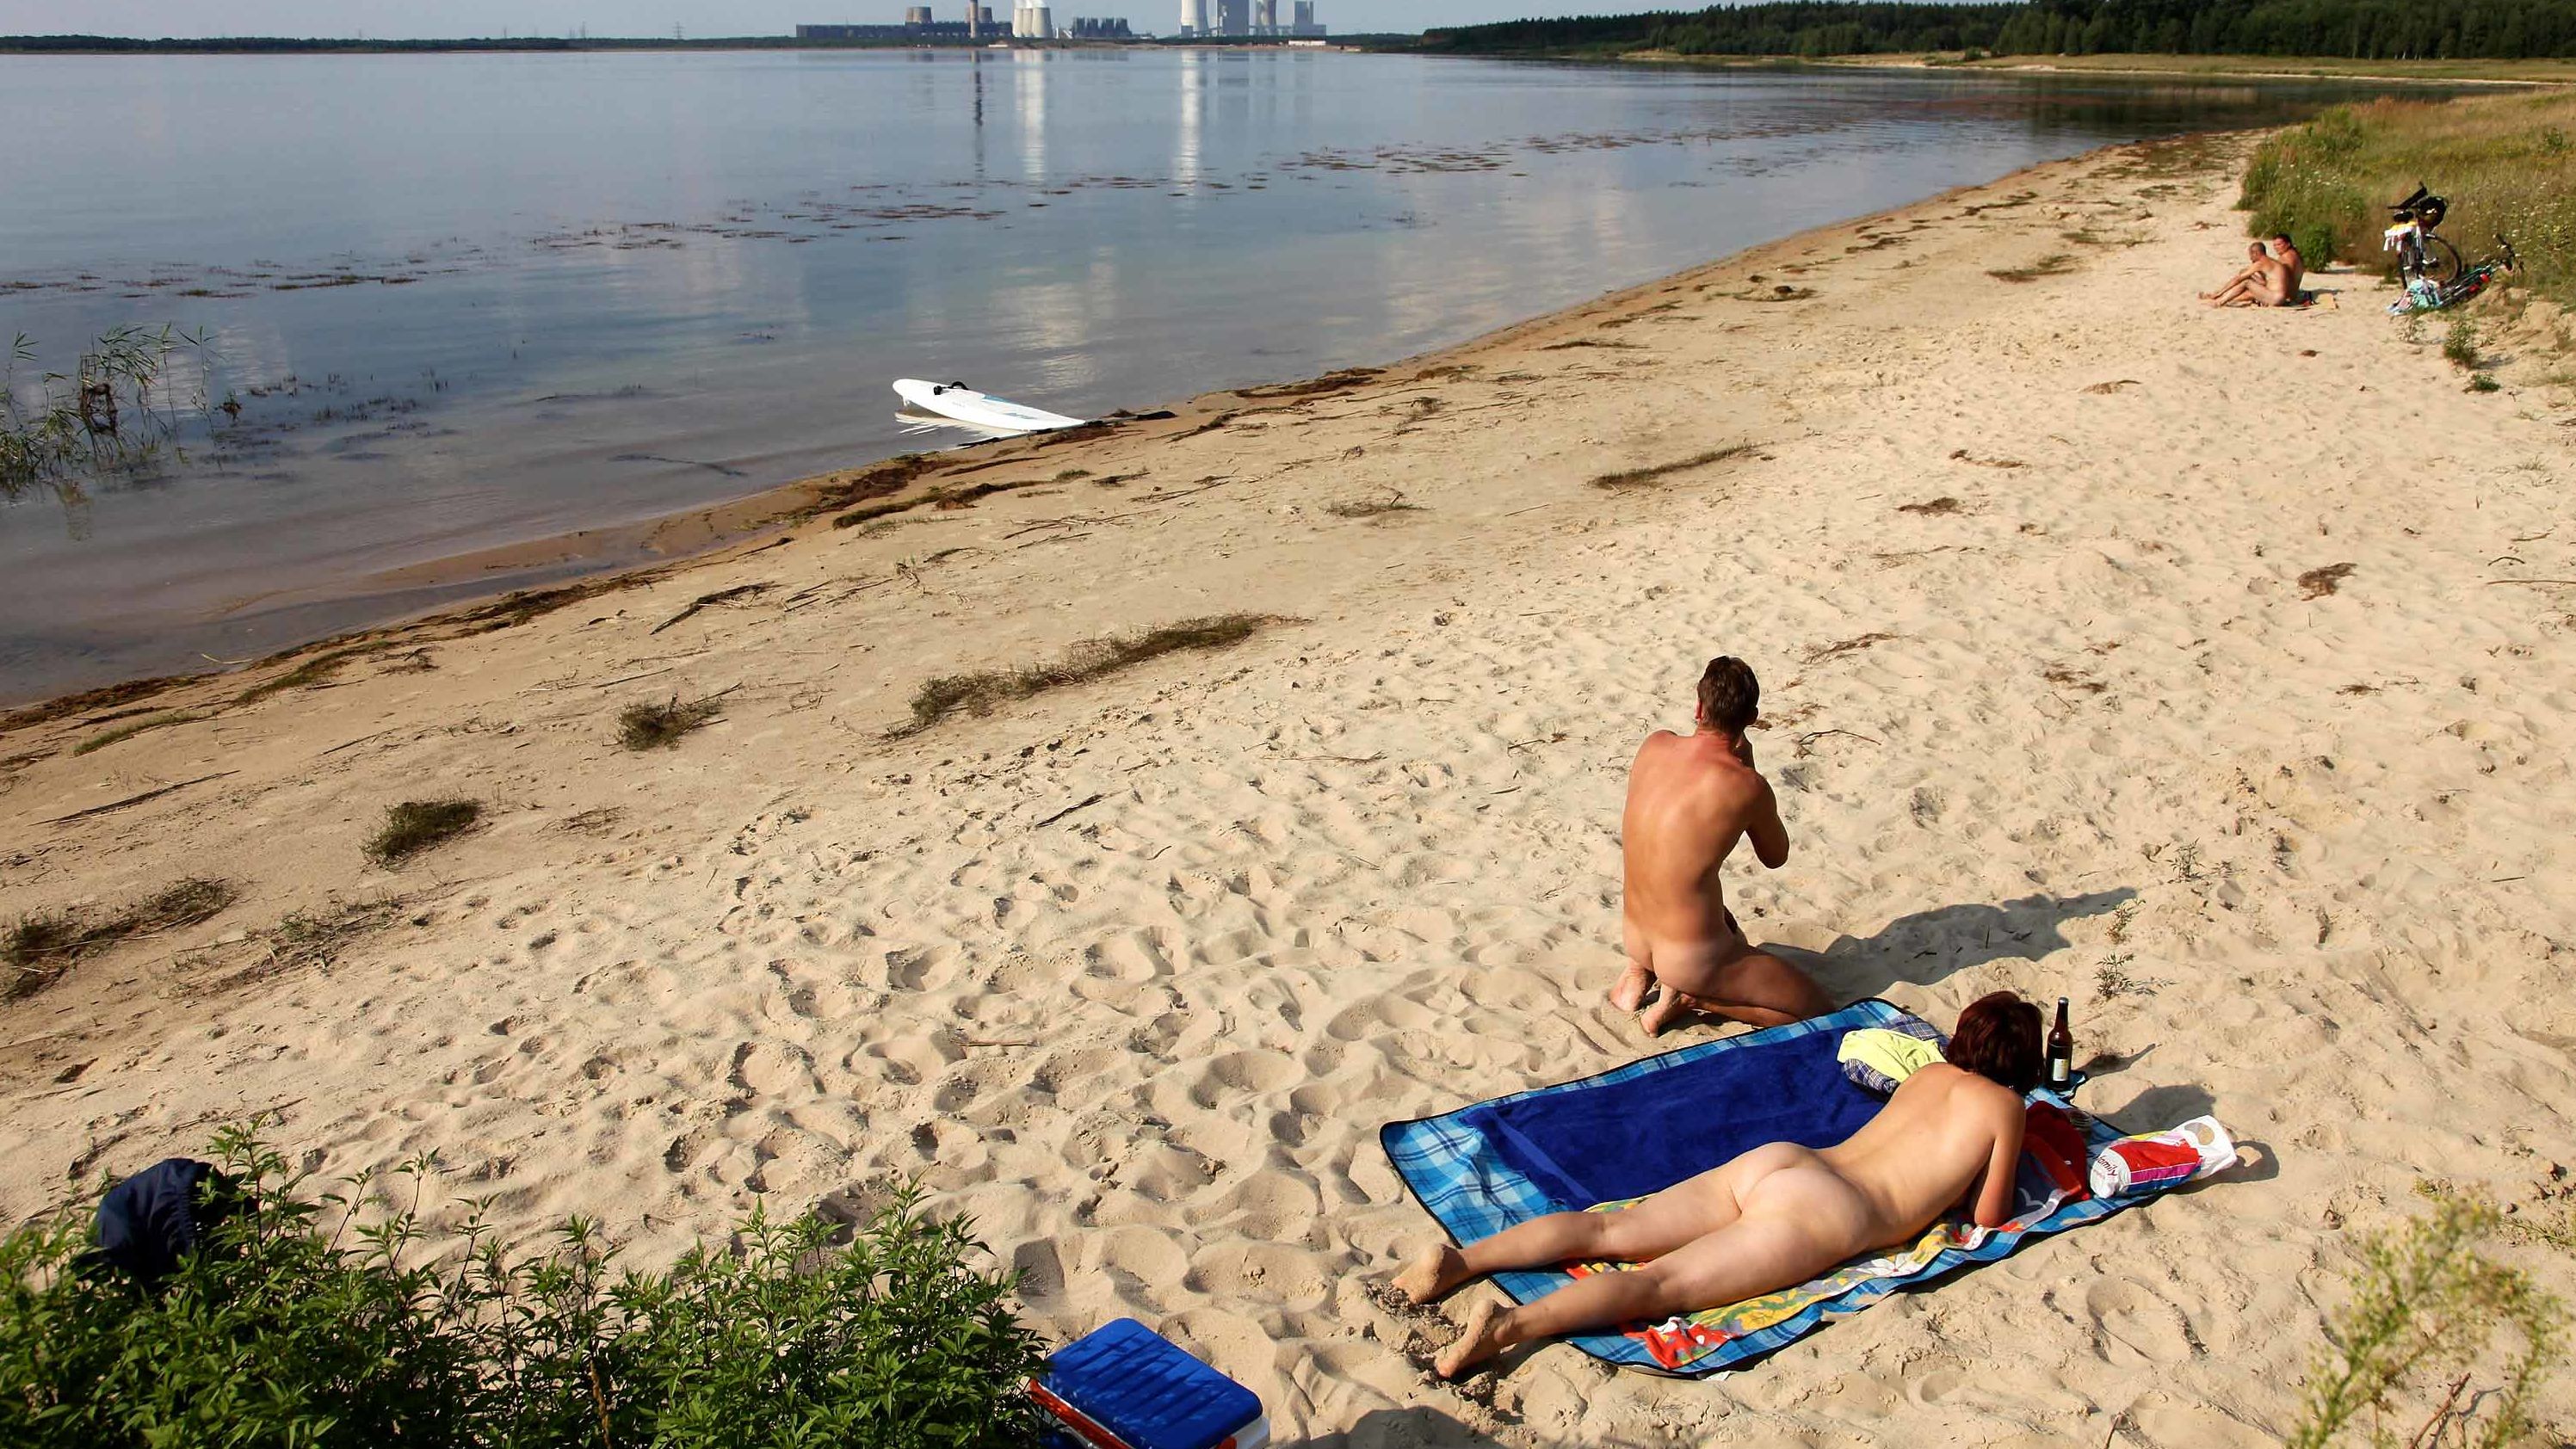 Naked Group Beach Sex - Nudity in Germany: The naked truth is revealed | CNN